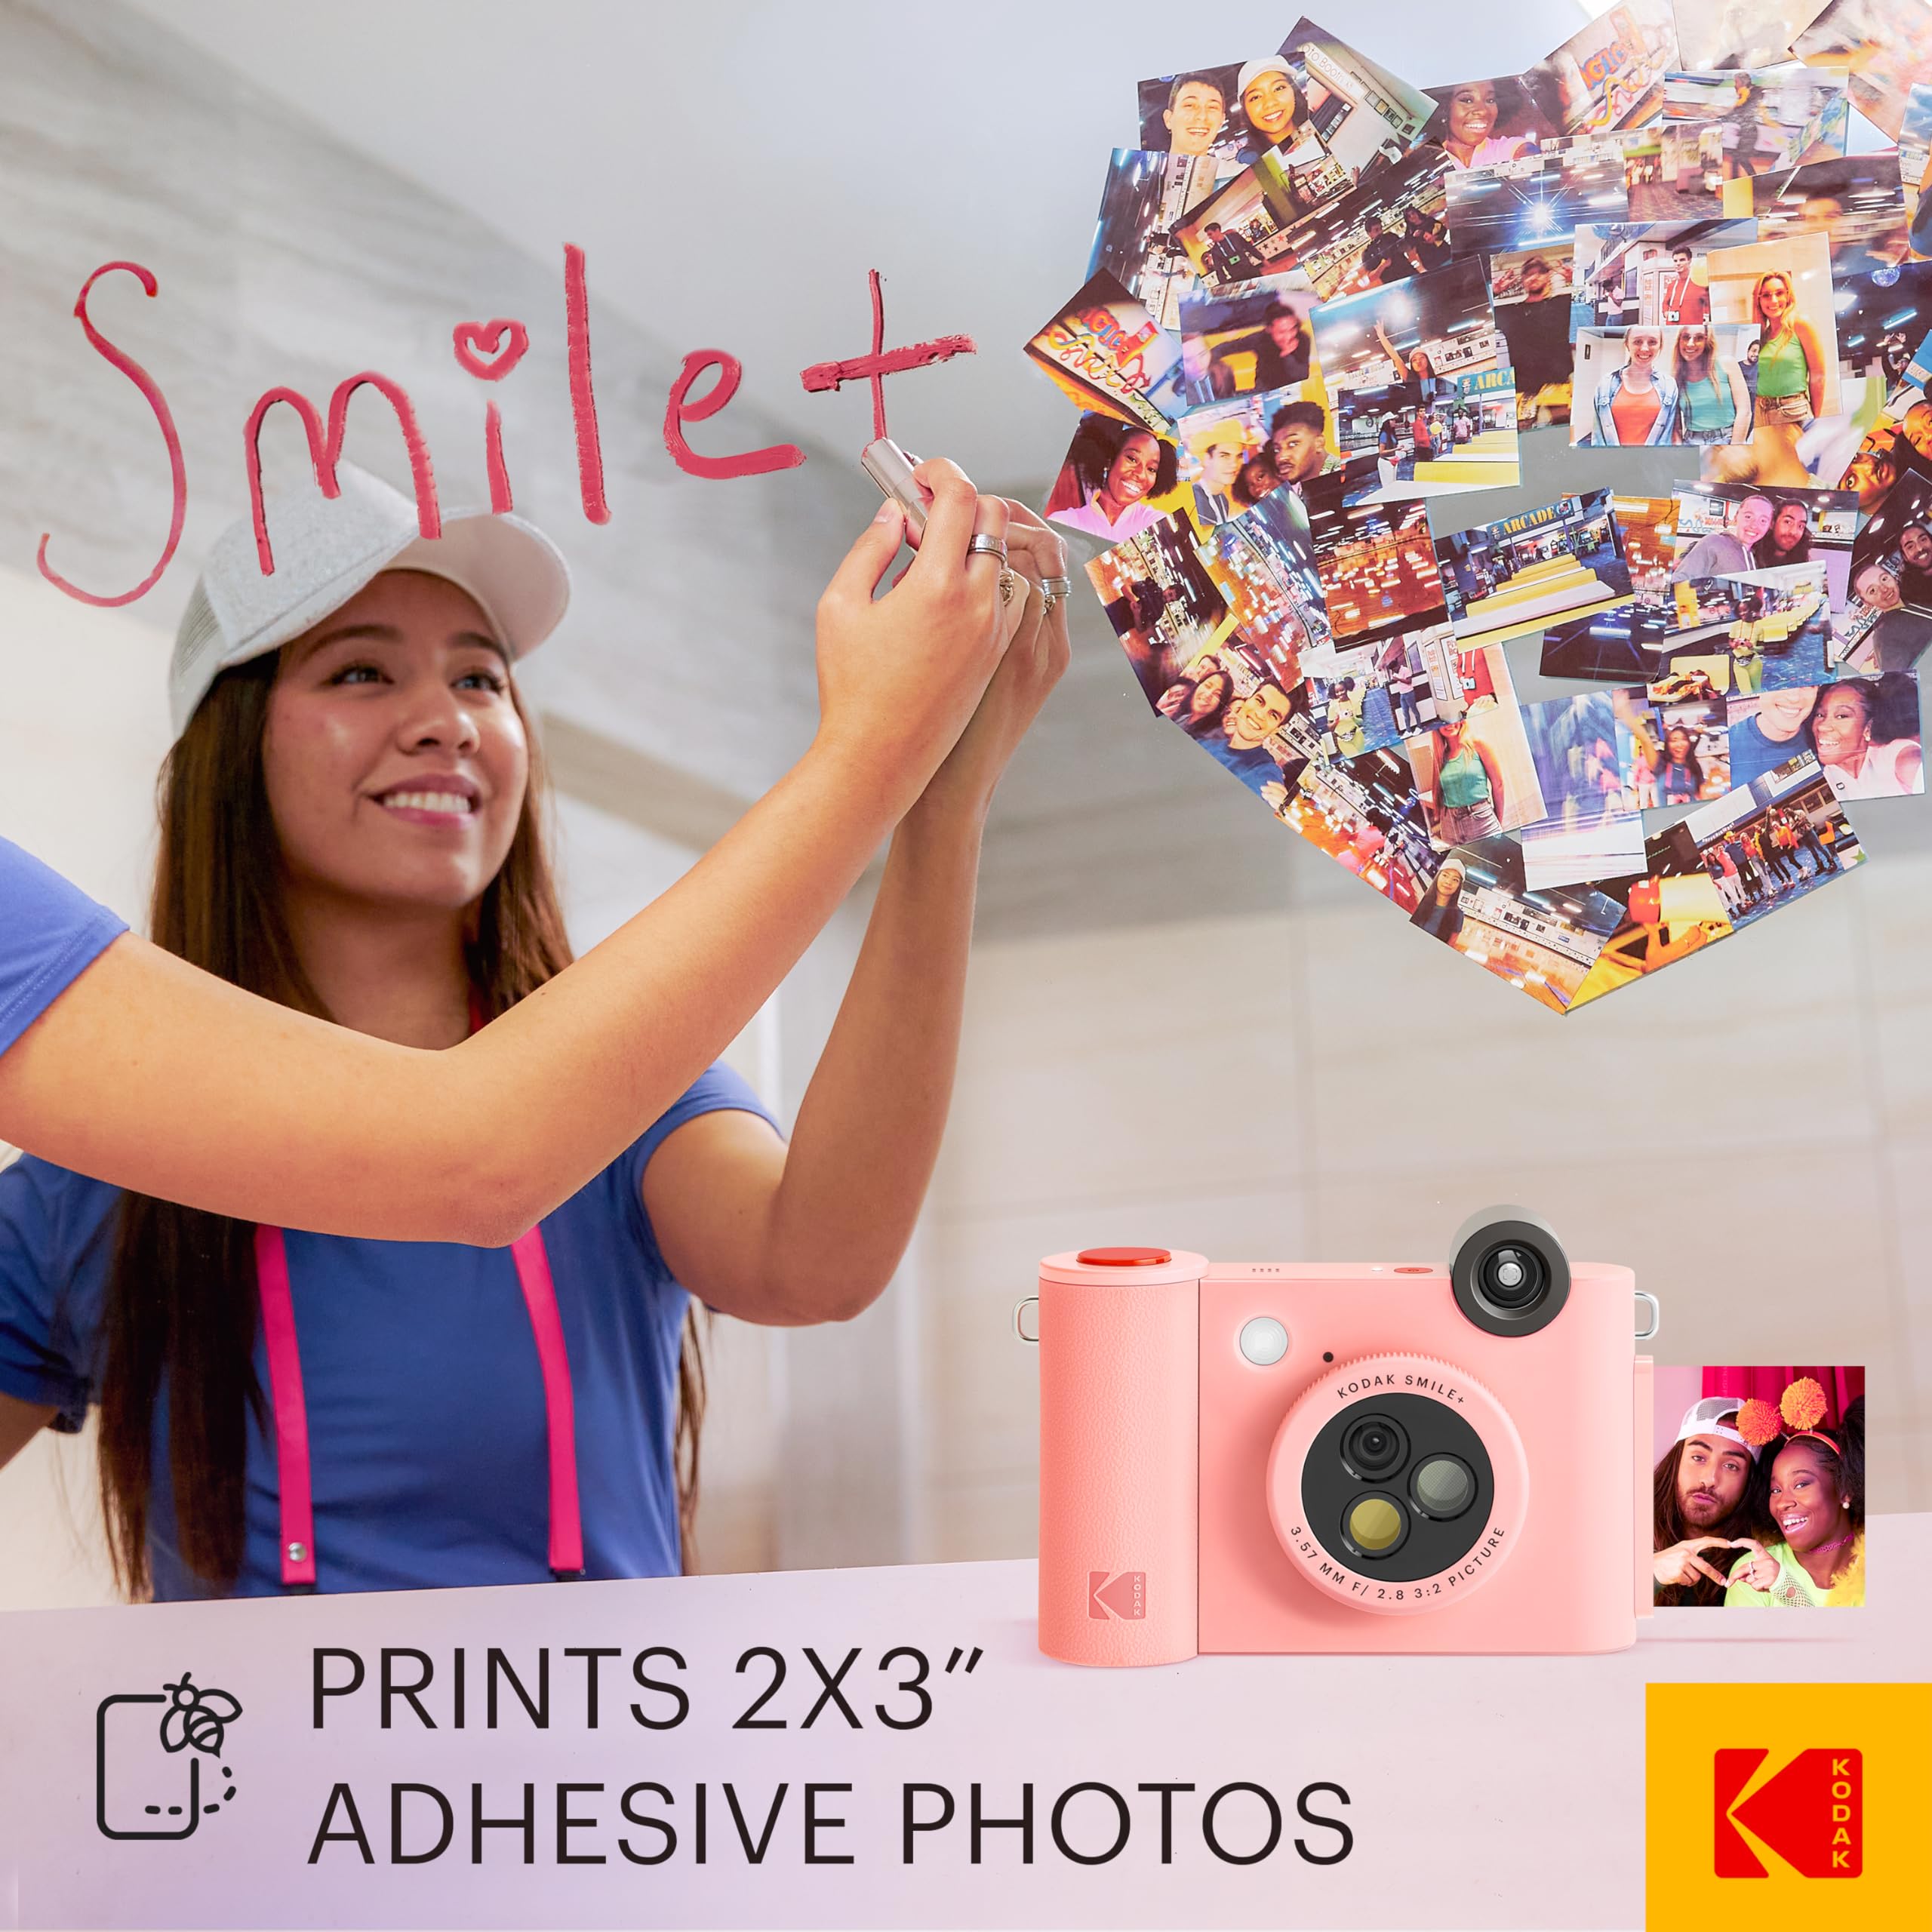 KODAK Smile+ Wireless Digital Instant Print Camera with Effect-Changing Lens, 2x3” Sticky-Backed Photo Prints, and Zink Printing Technology, Compatible with iOS and Android Devices - Pink